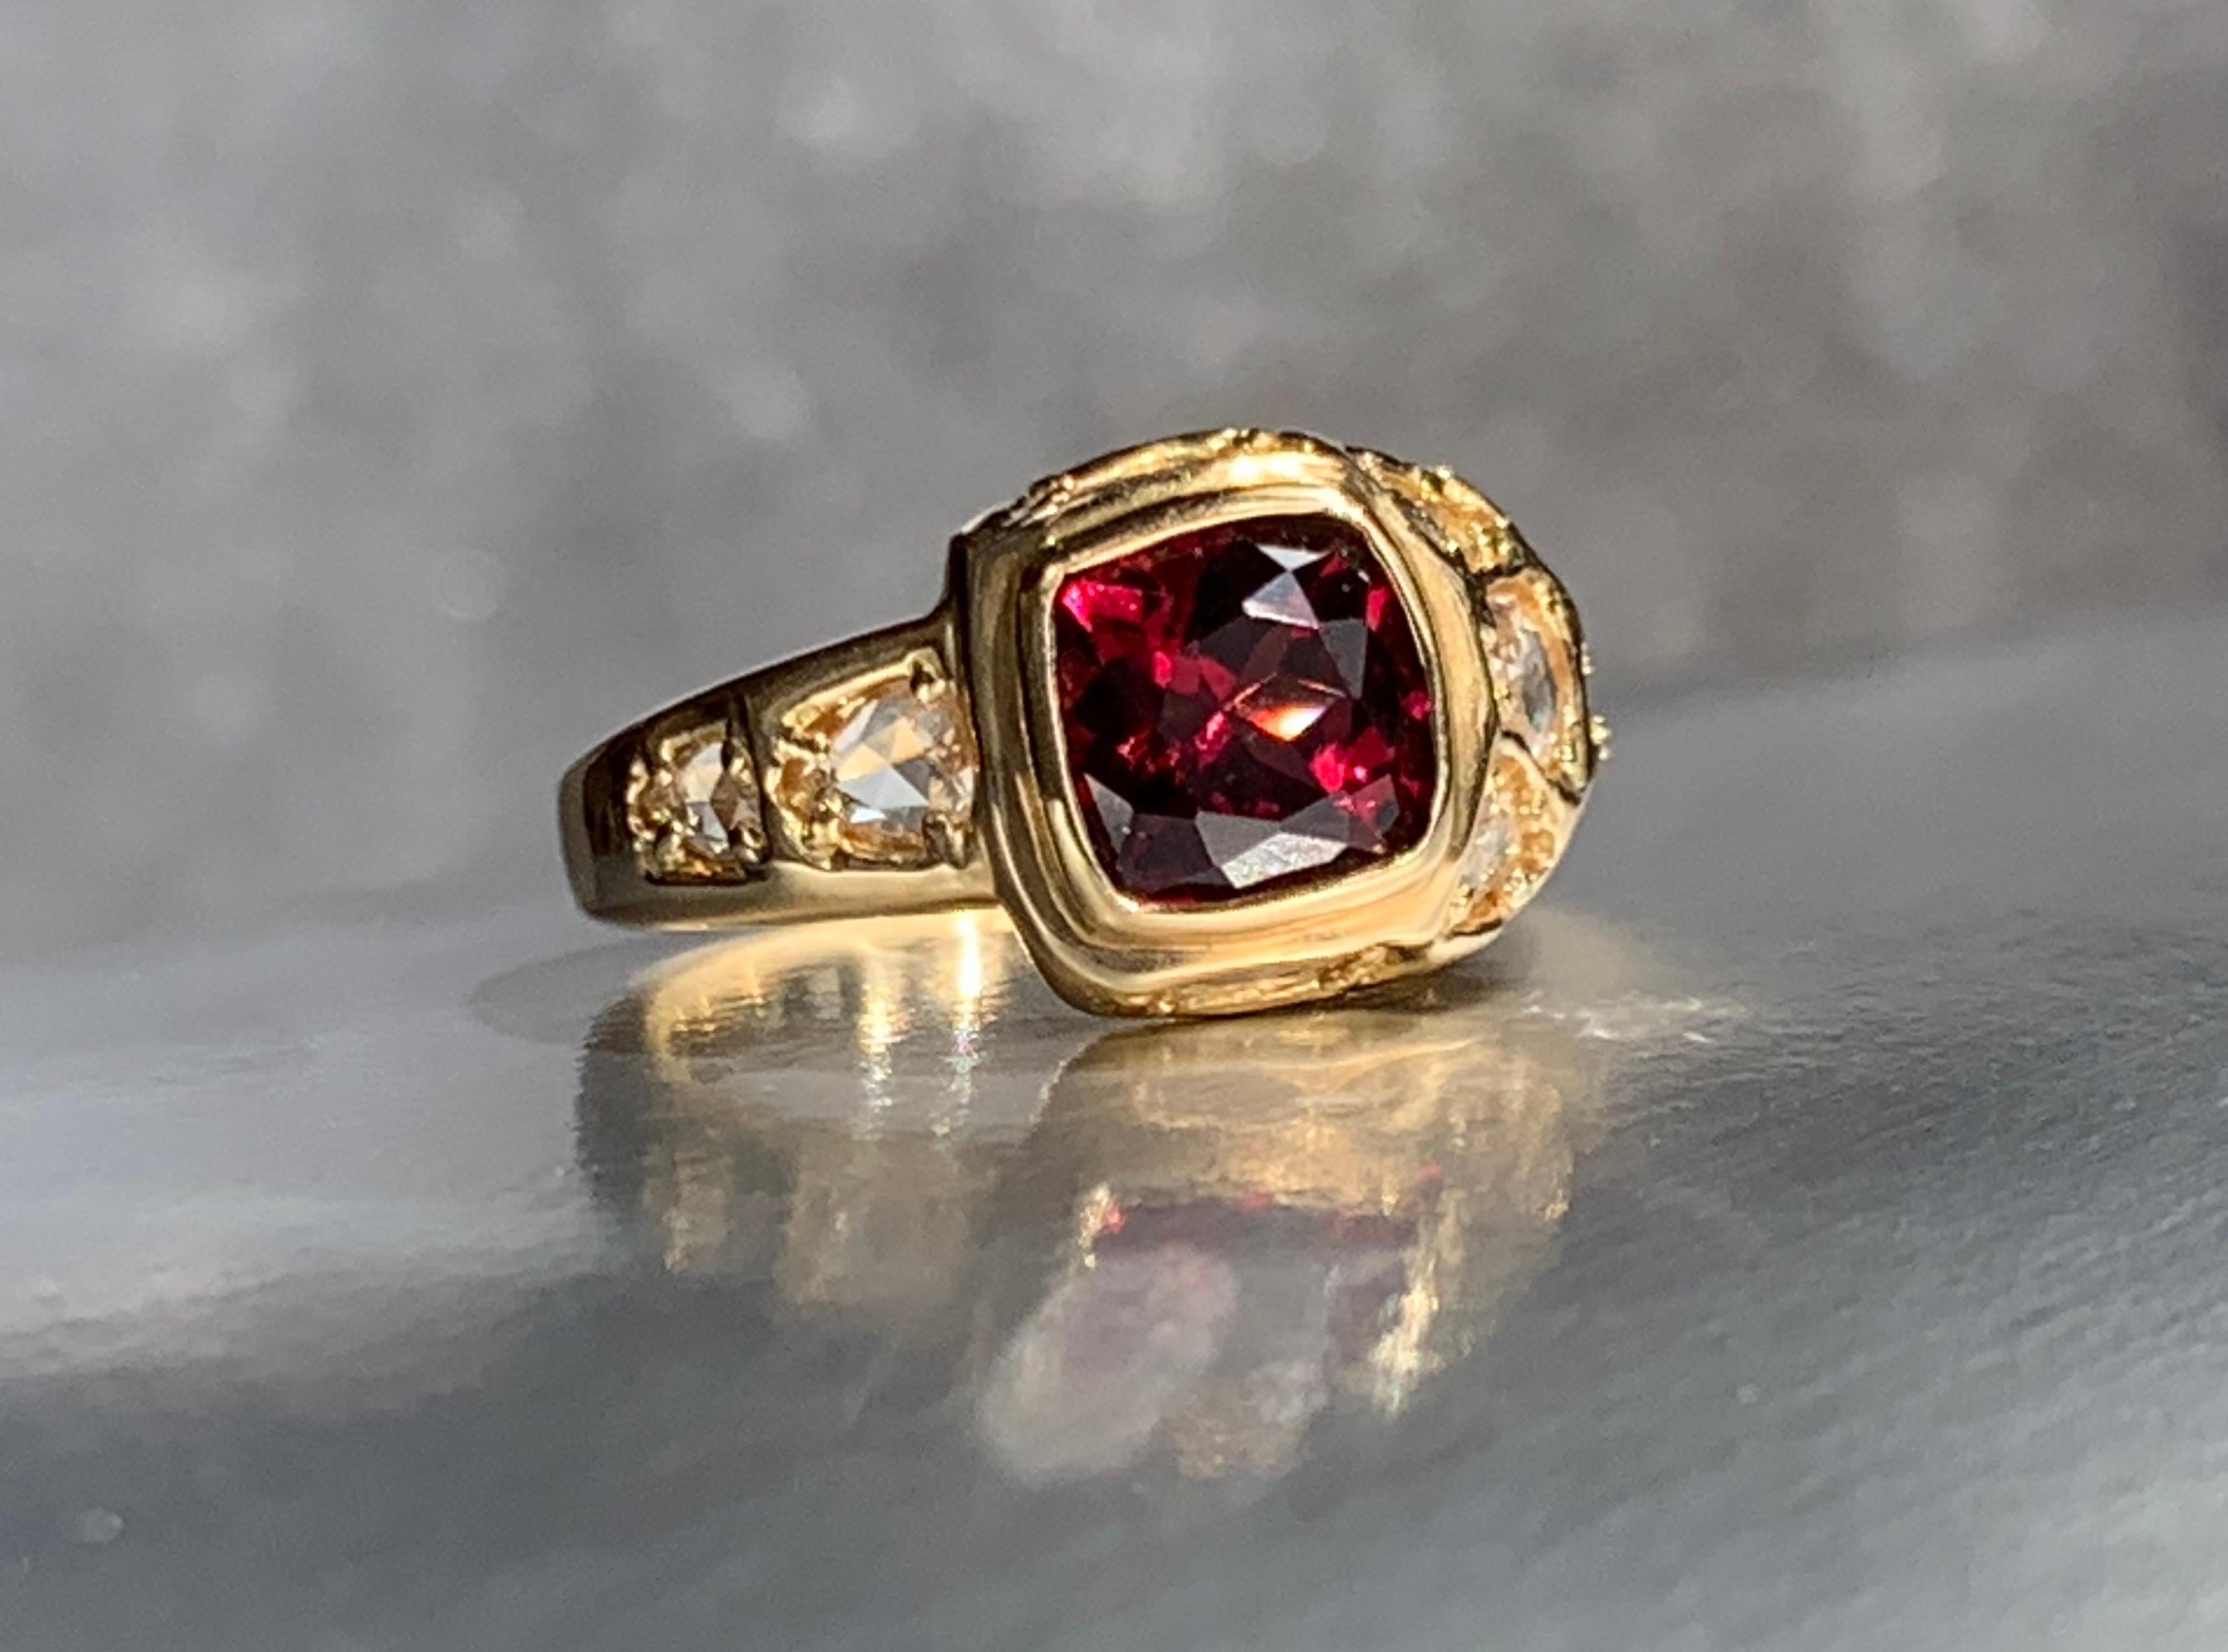 The one-of-a-kind Garnet Treasure ring possesses a timeless sensibility. The intriguing composition incorporates fine white rose cut diamonds. The asymmetric design and novel placement of diamonds provides lasting interest.

18kt yellow gold
Garnet